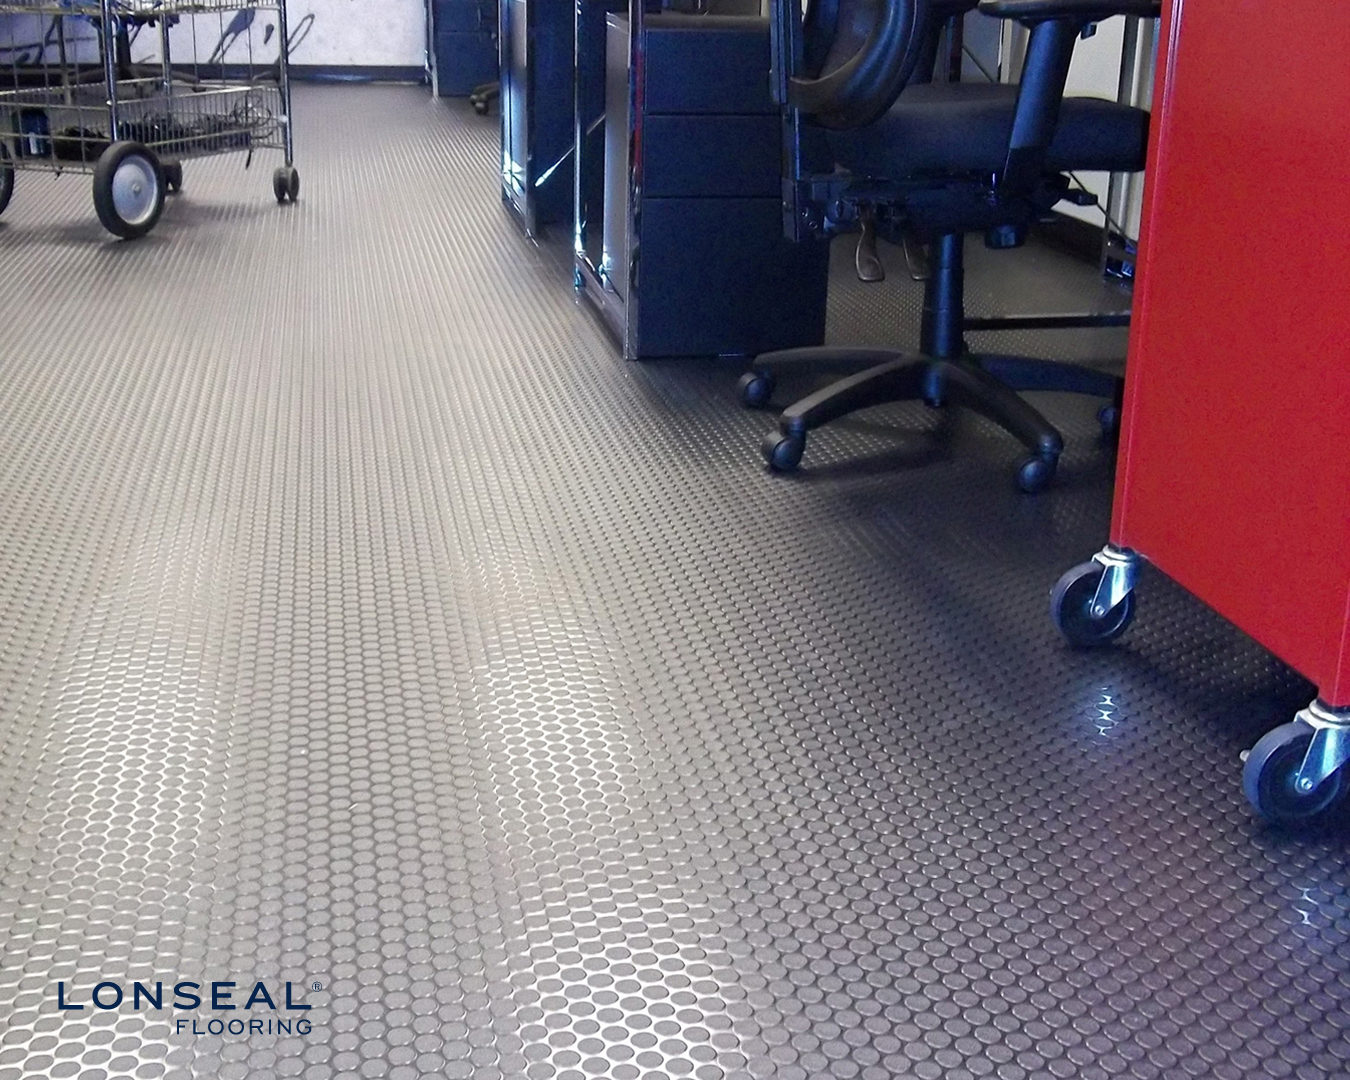 Lonseal, Sheet Vinyl Flooring, The Loncoin series boasts a coin surface embossing that delivers a striking directional design